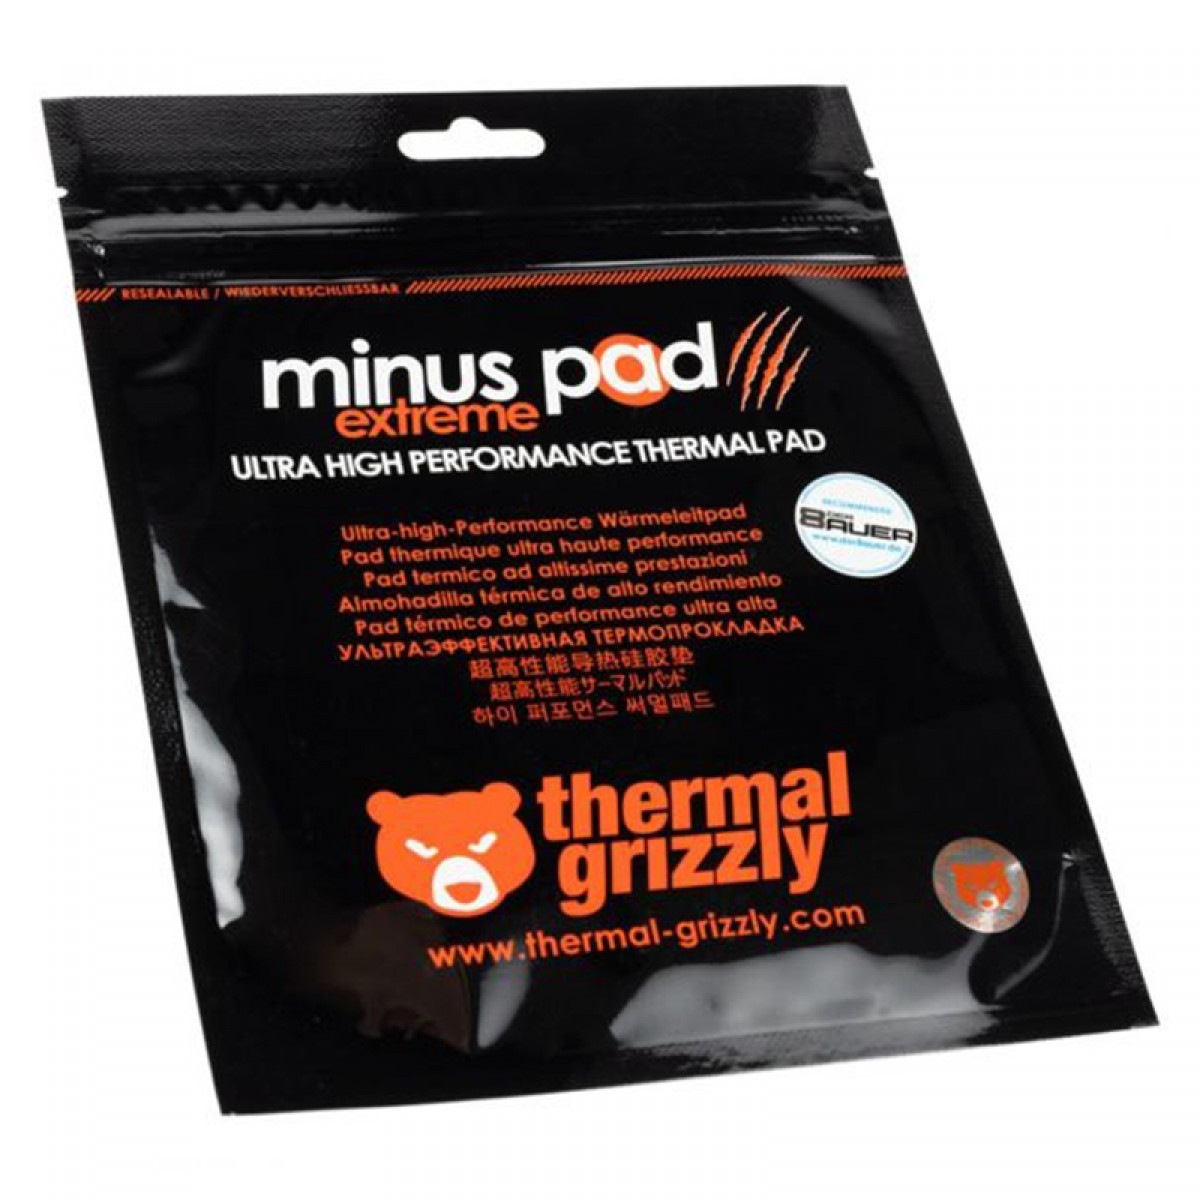 Thermal Pad Thermal Grizzly Minus Pad EXTREME, 120 x 20 x 0.5mm, TG-MPE-120-20-05-R